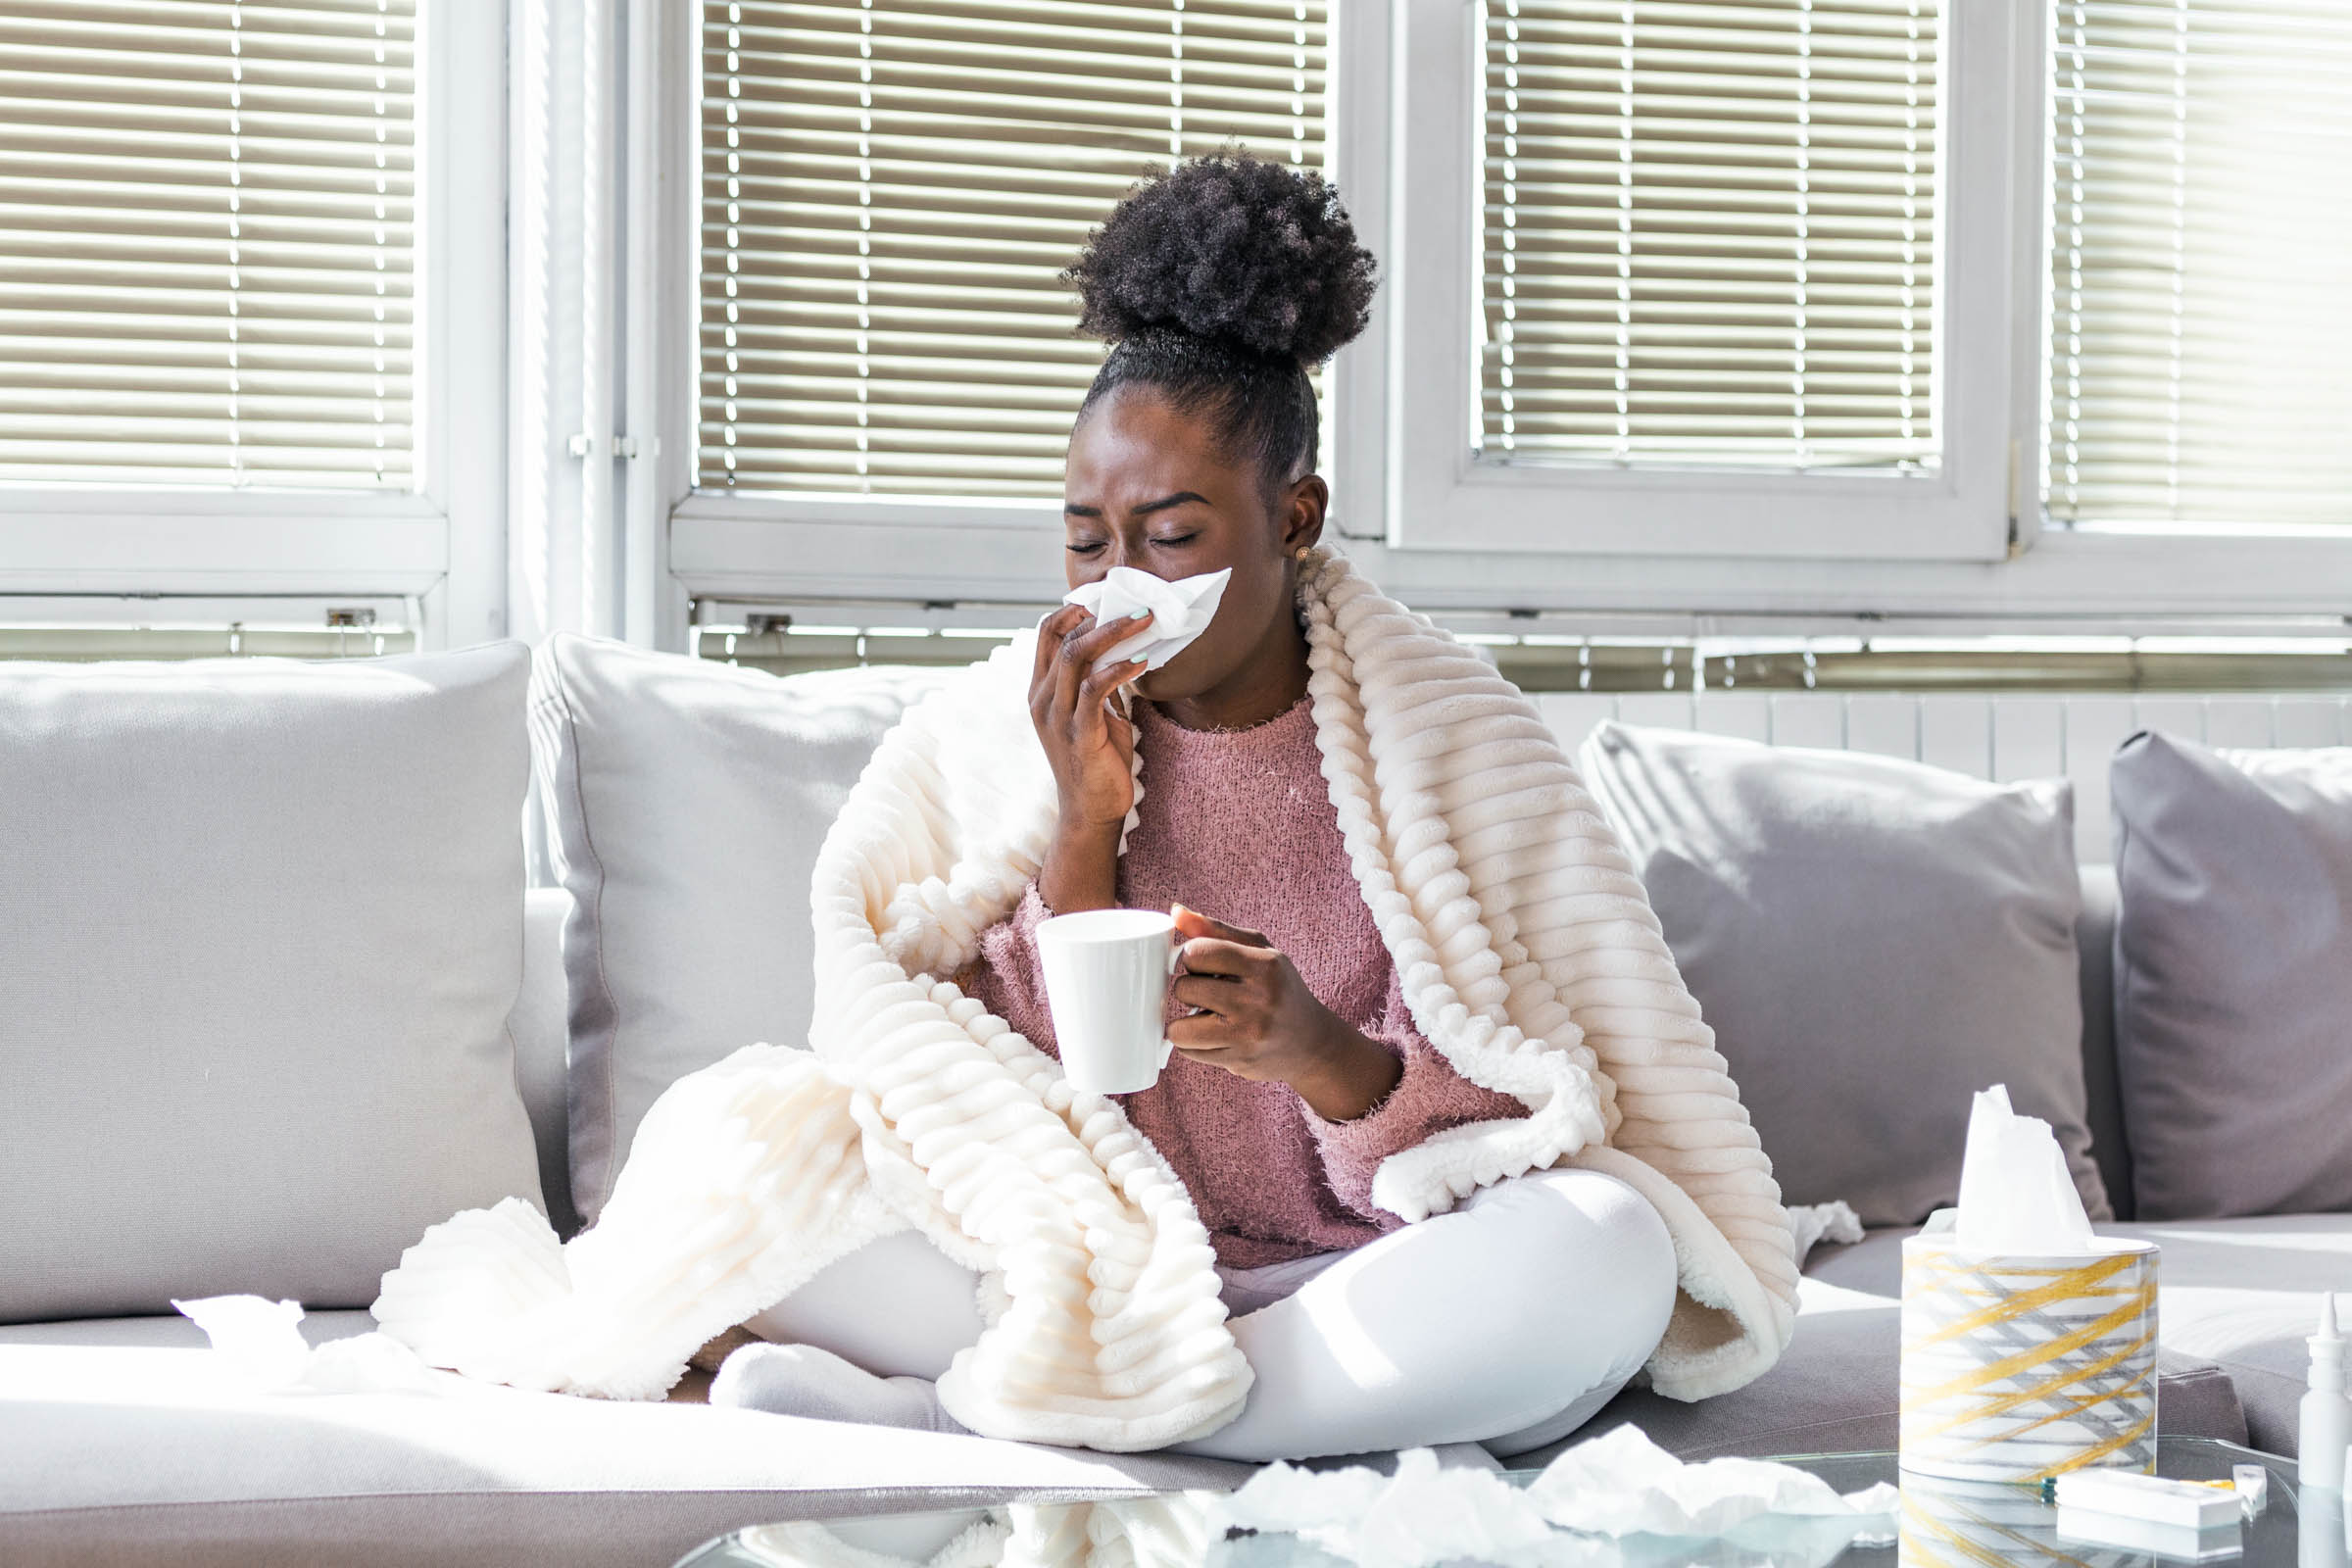 Woman wrapped in a blanket sneezing into a tissue while holding a mug on a couch, suggesting flu recovery at home.